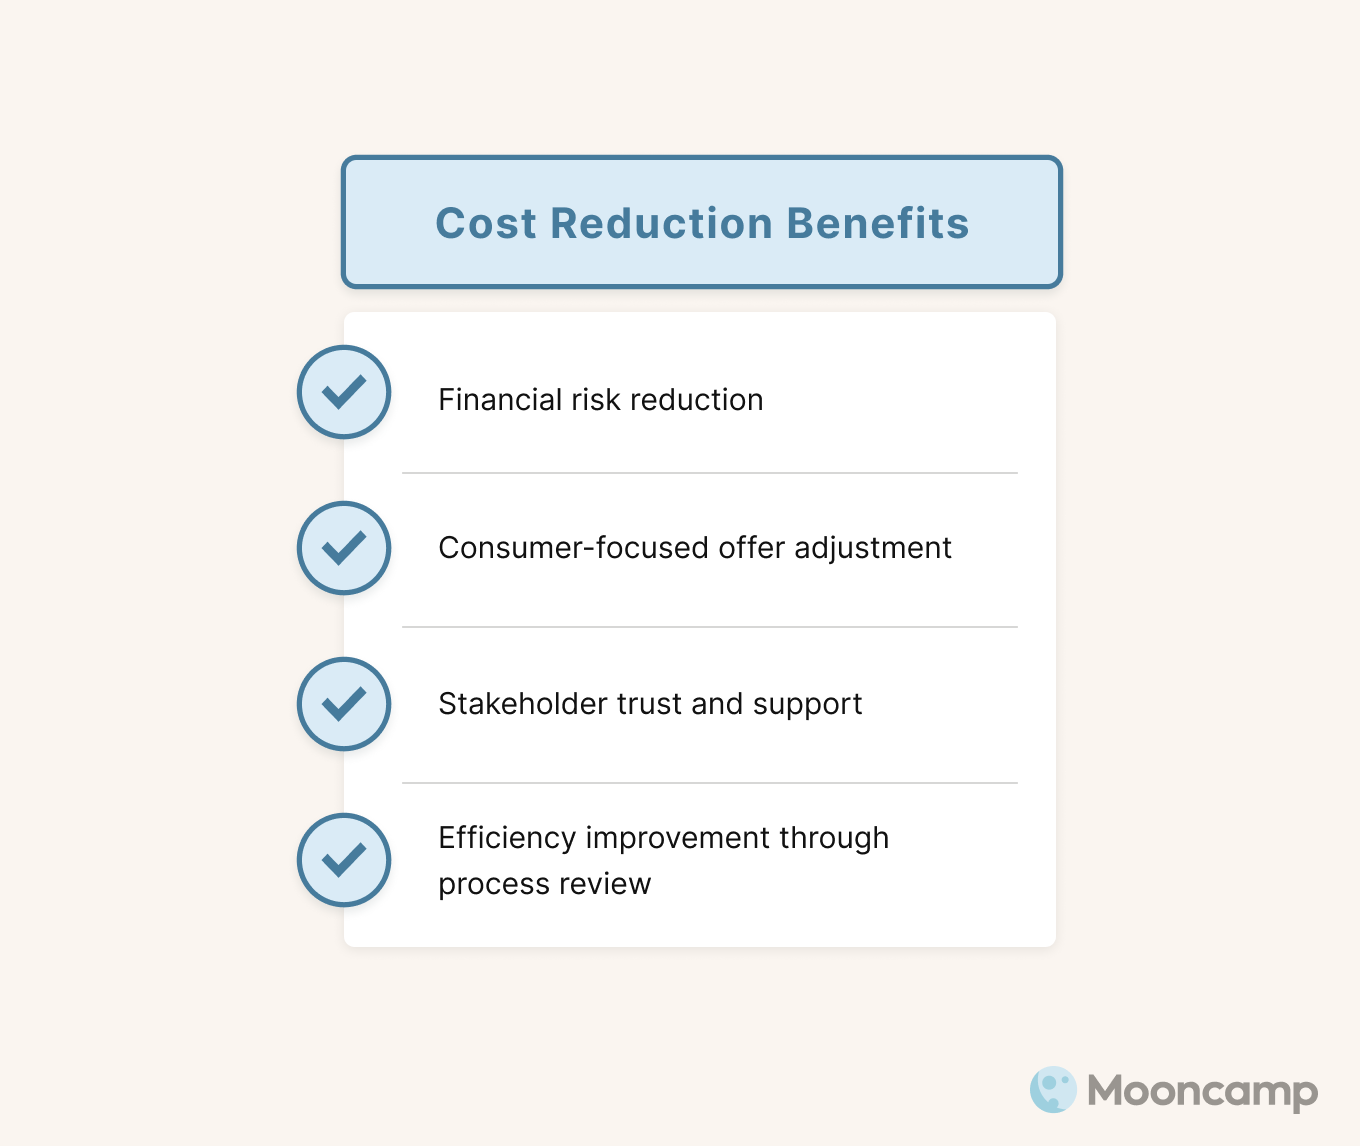 Benefits of cost reduction